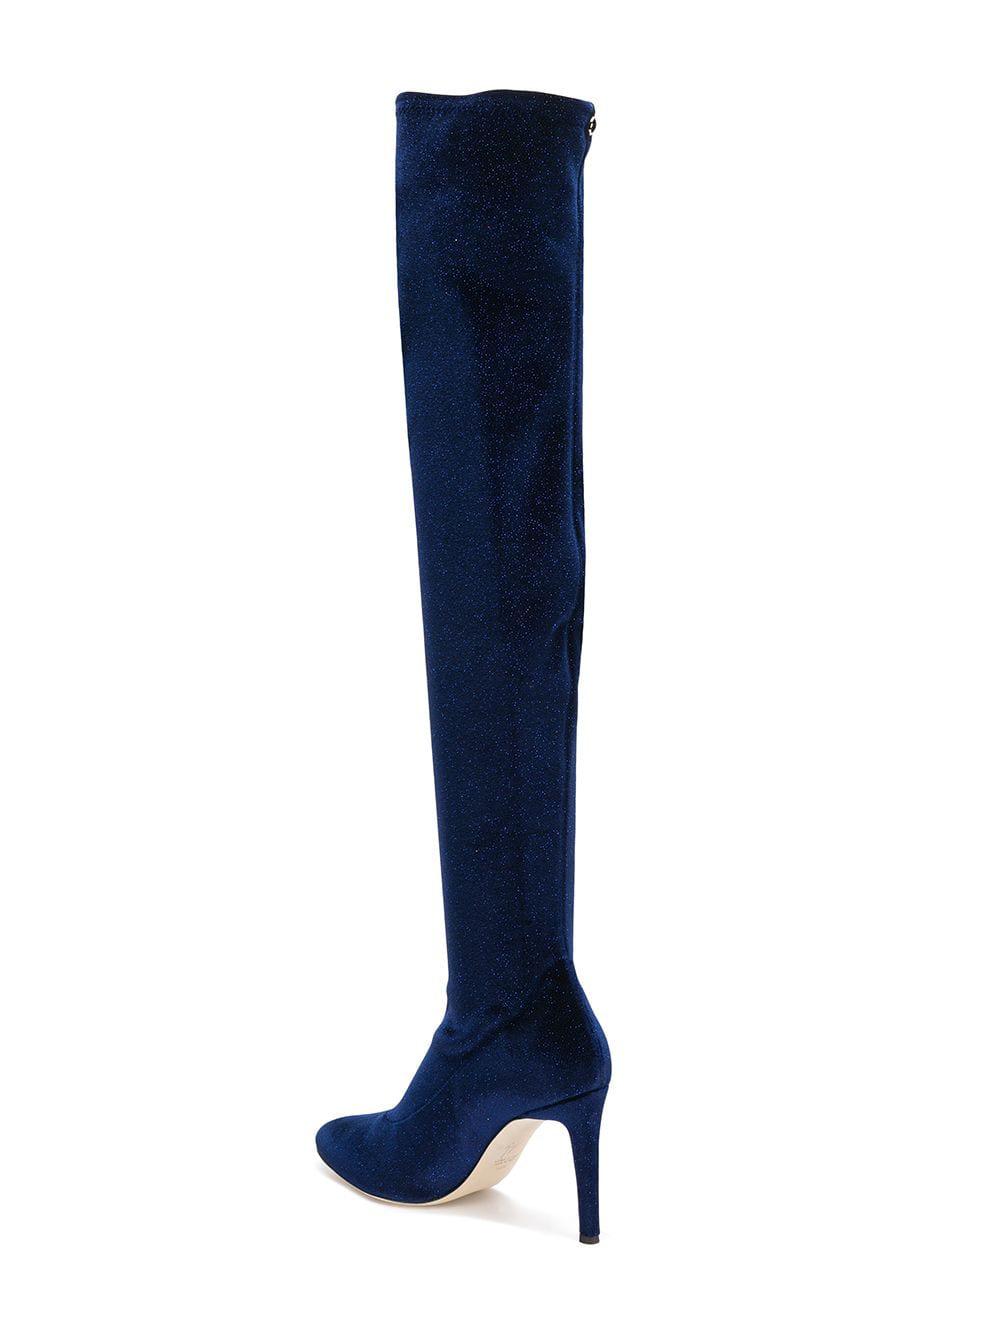 Giuseppe Zanotti Synthetic Over-the-knee Boots in - Lyst